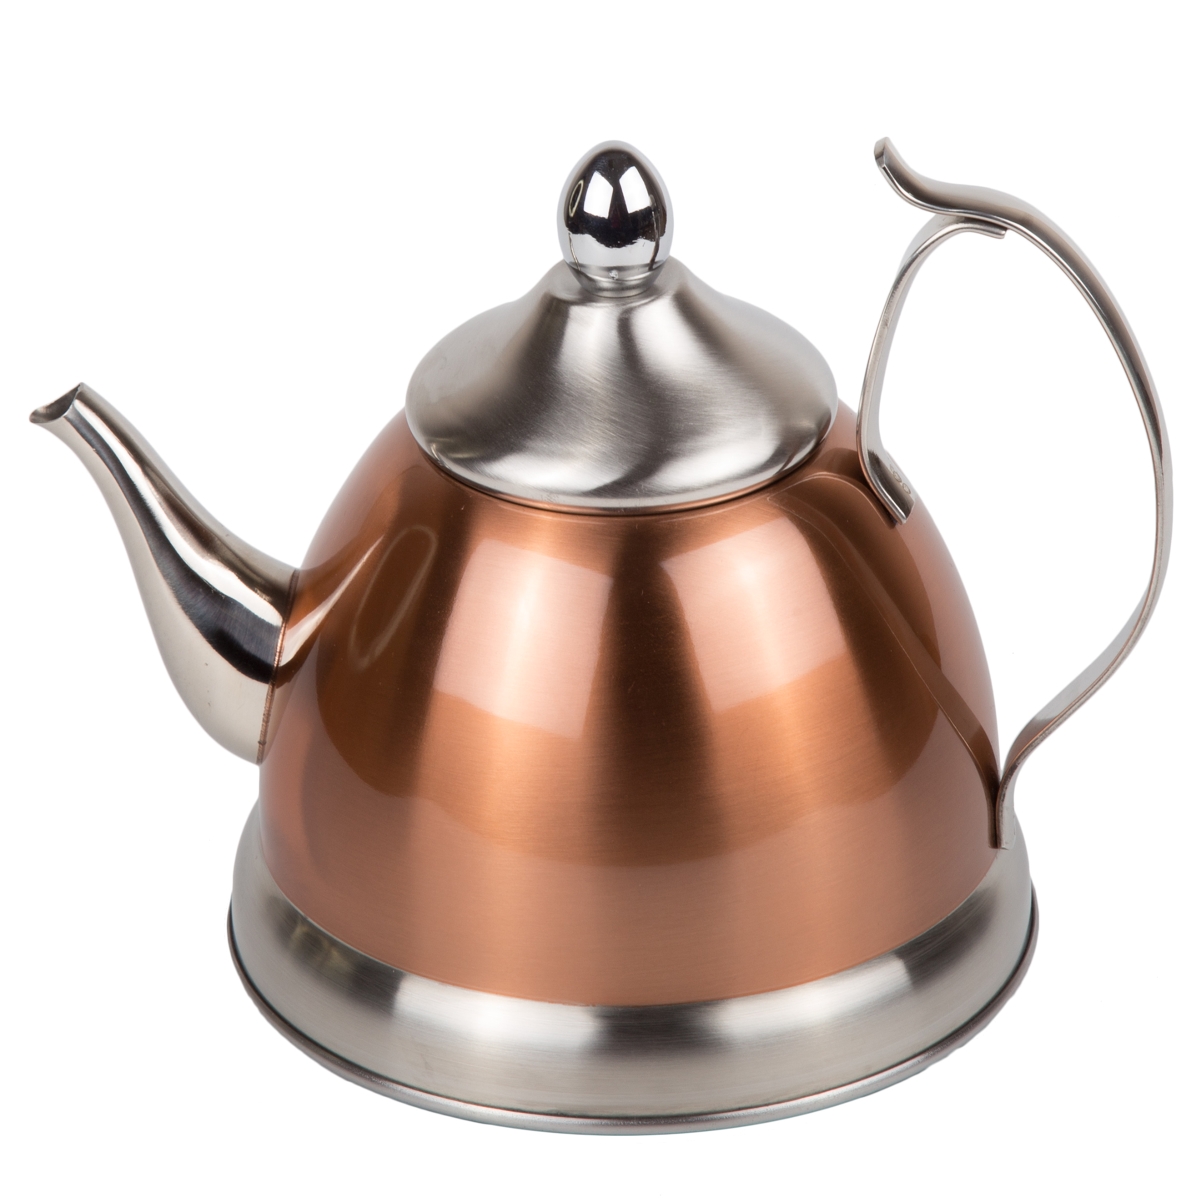 Picture of Creative Home  77075 Creative Home Nobili-Tea 1.0 Quart Stainless Steel Tea Kettle Teapot with Removable Infuser Basket, Copper Color